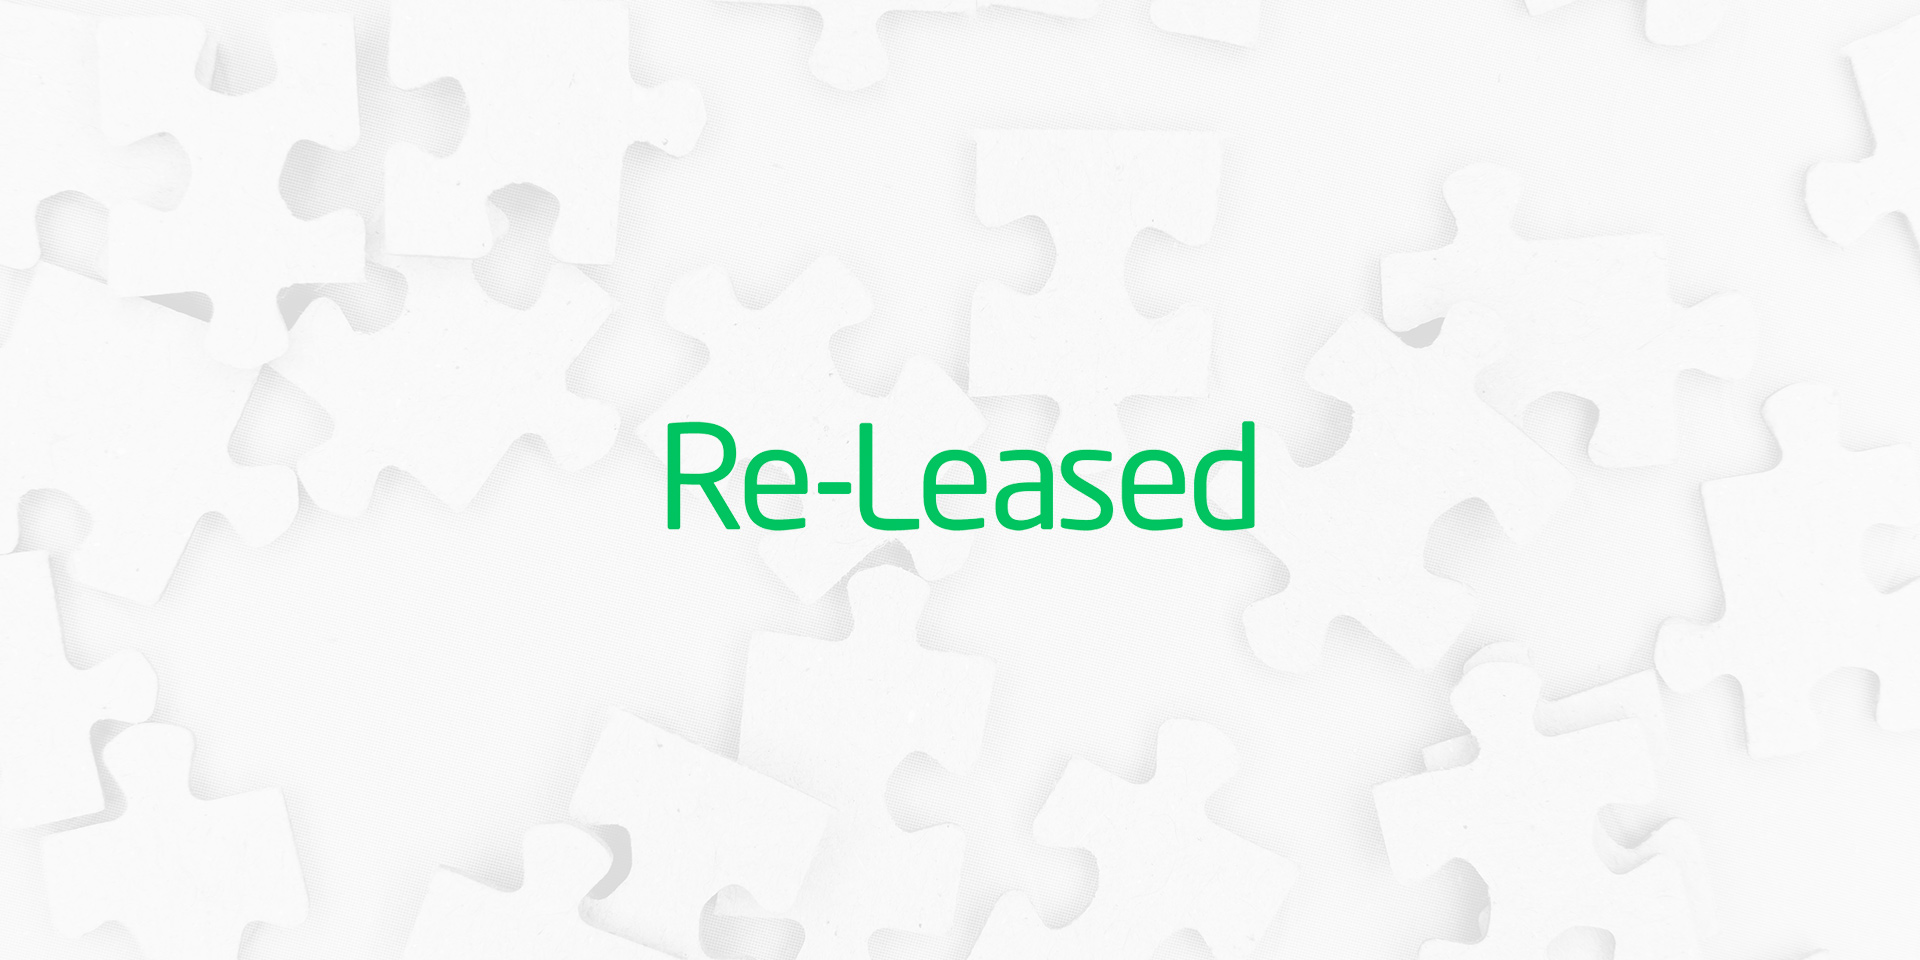 Introducing Re-Leased